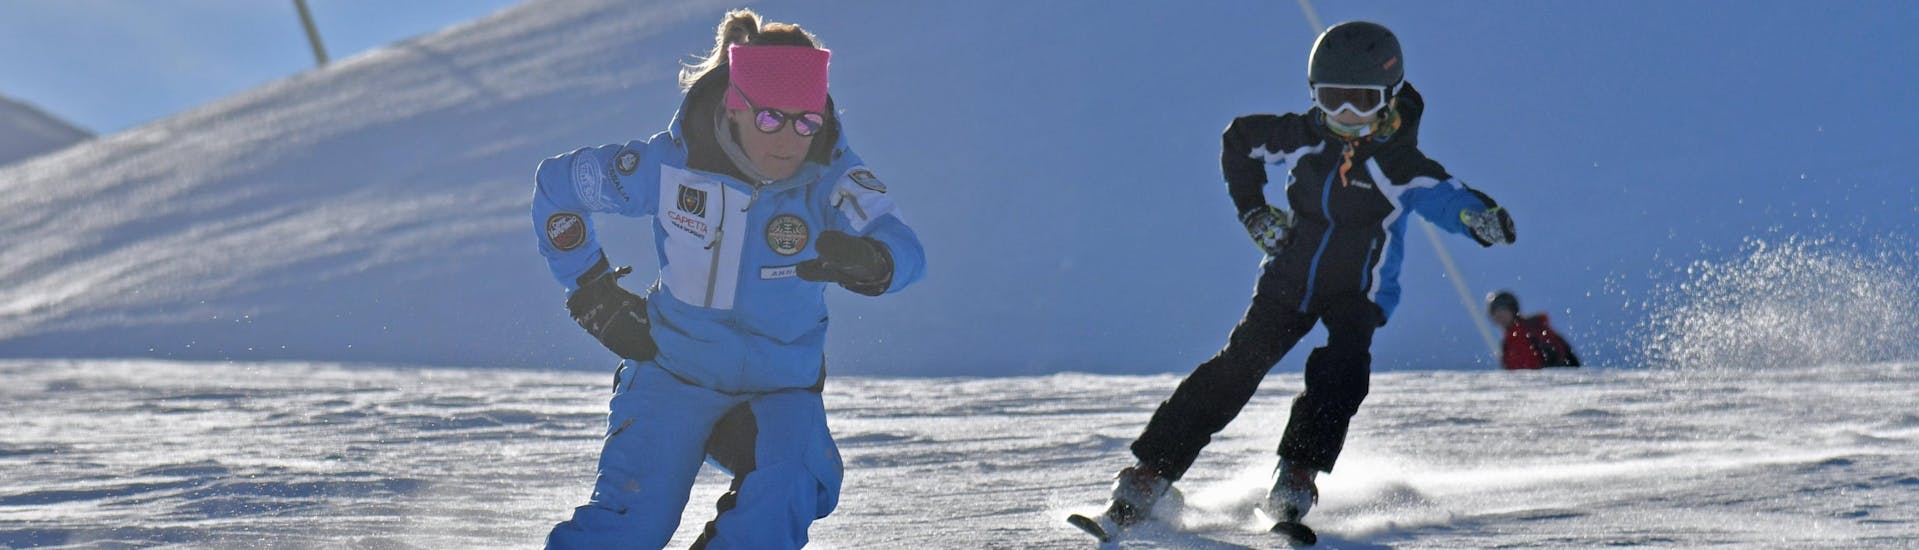 Ski instructor and participant train together on the slopes of Prato Nevoso during one of thePrivate Ski Lessons for Kids of All Levels. 